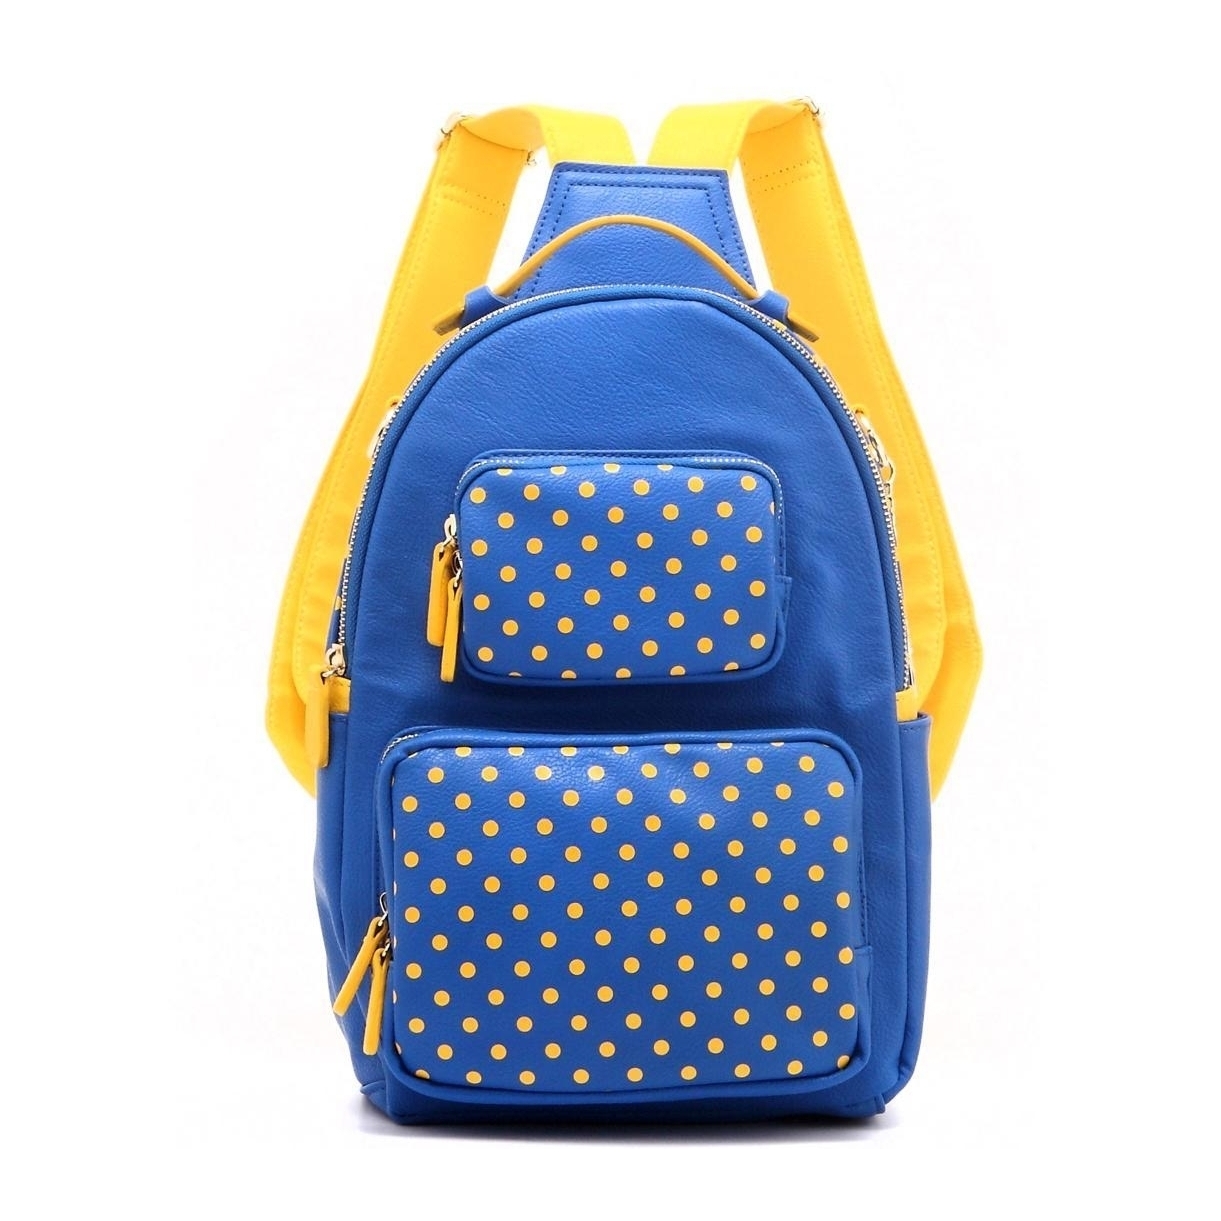 SCORE! Natalie Michelle Medium Polka Dot Designer Backpack - Imperial Blue And Yellow Gold